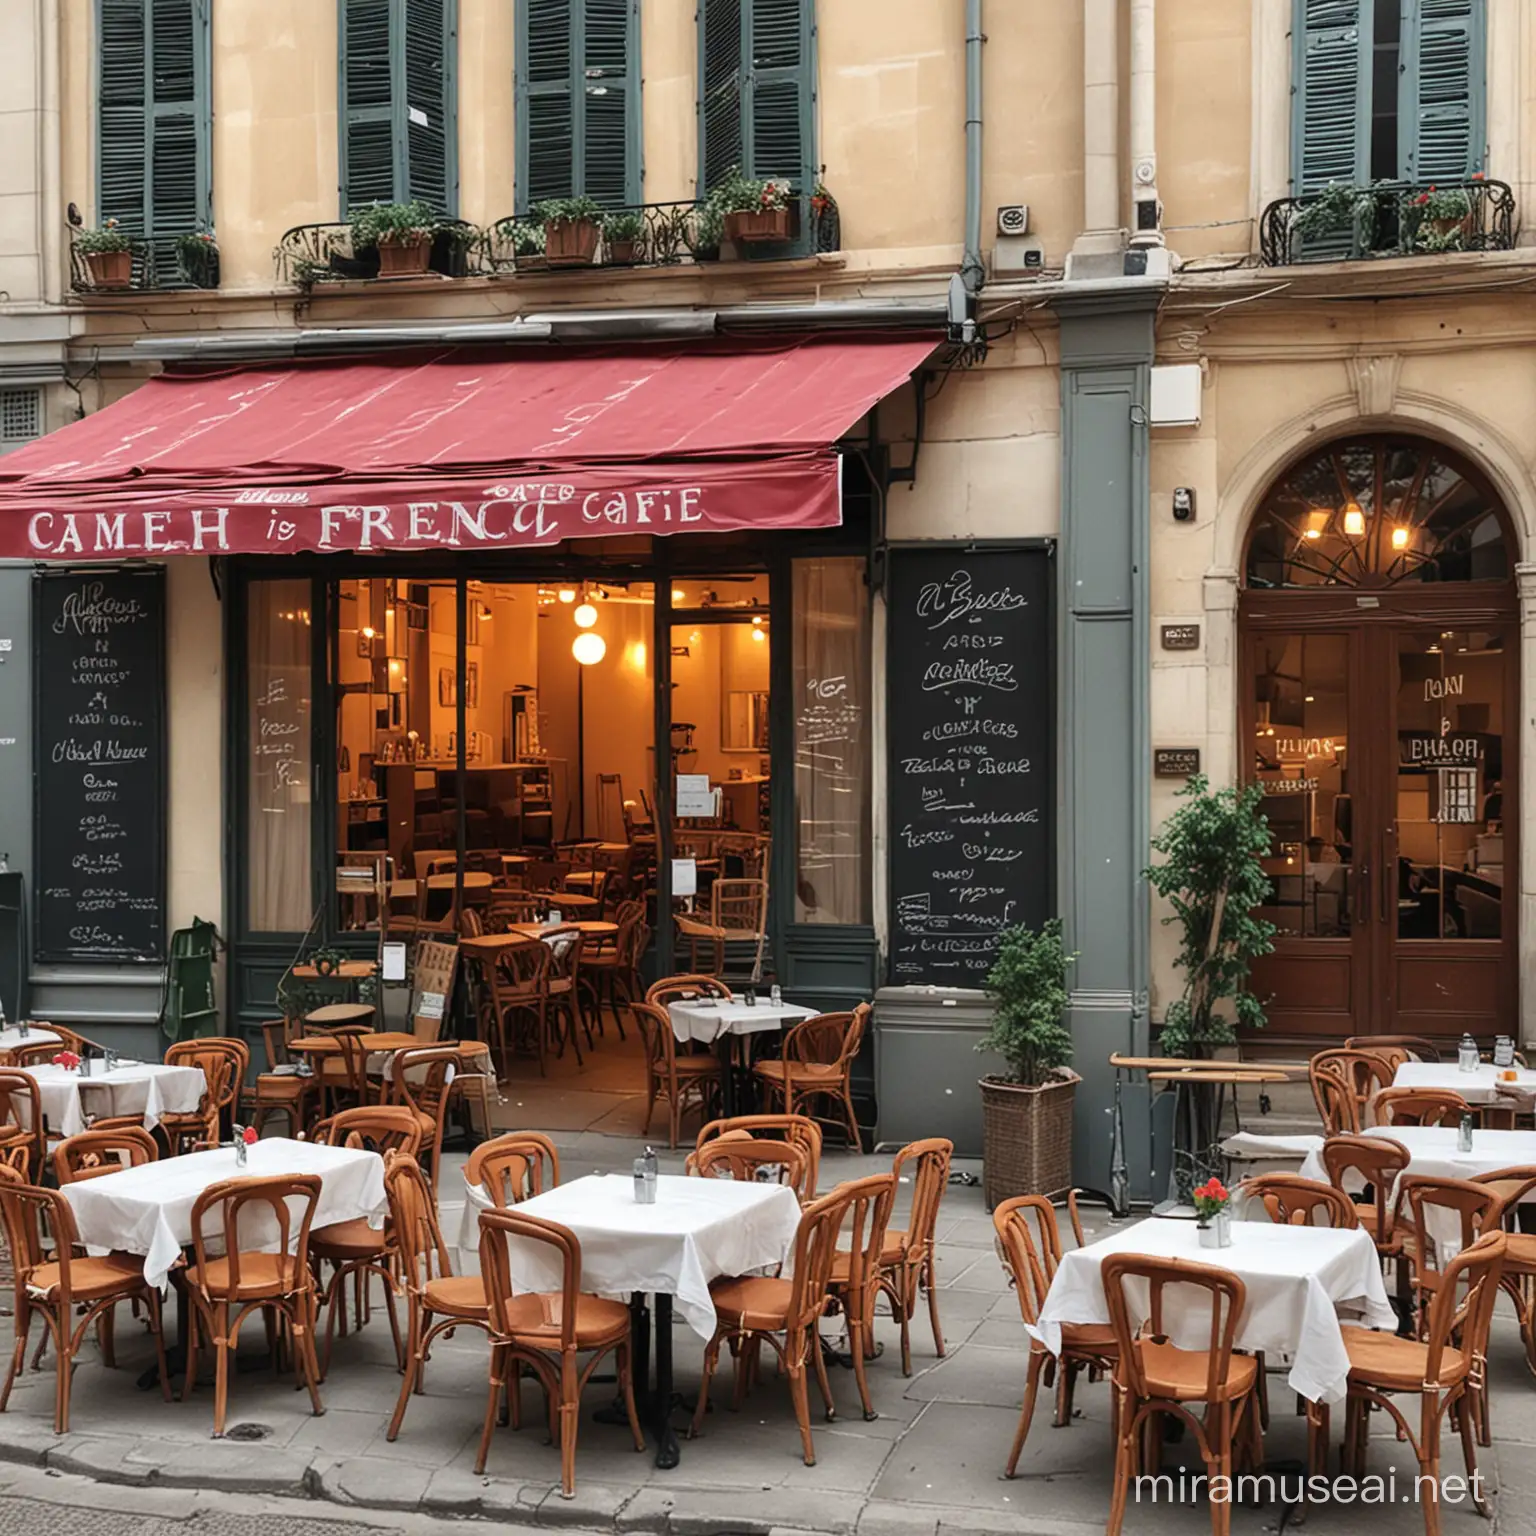 Charming French Cafe Scene with Outdoor Dining and Cobblestone Streets